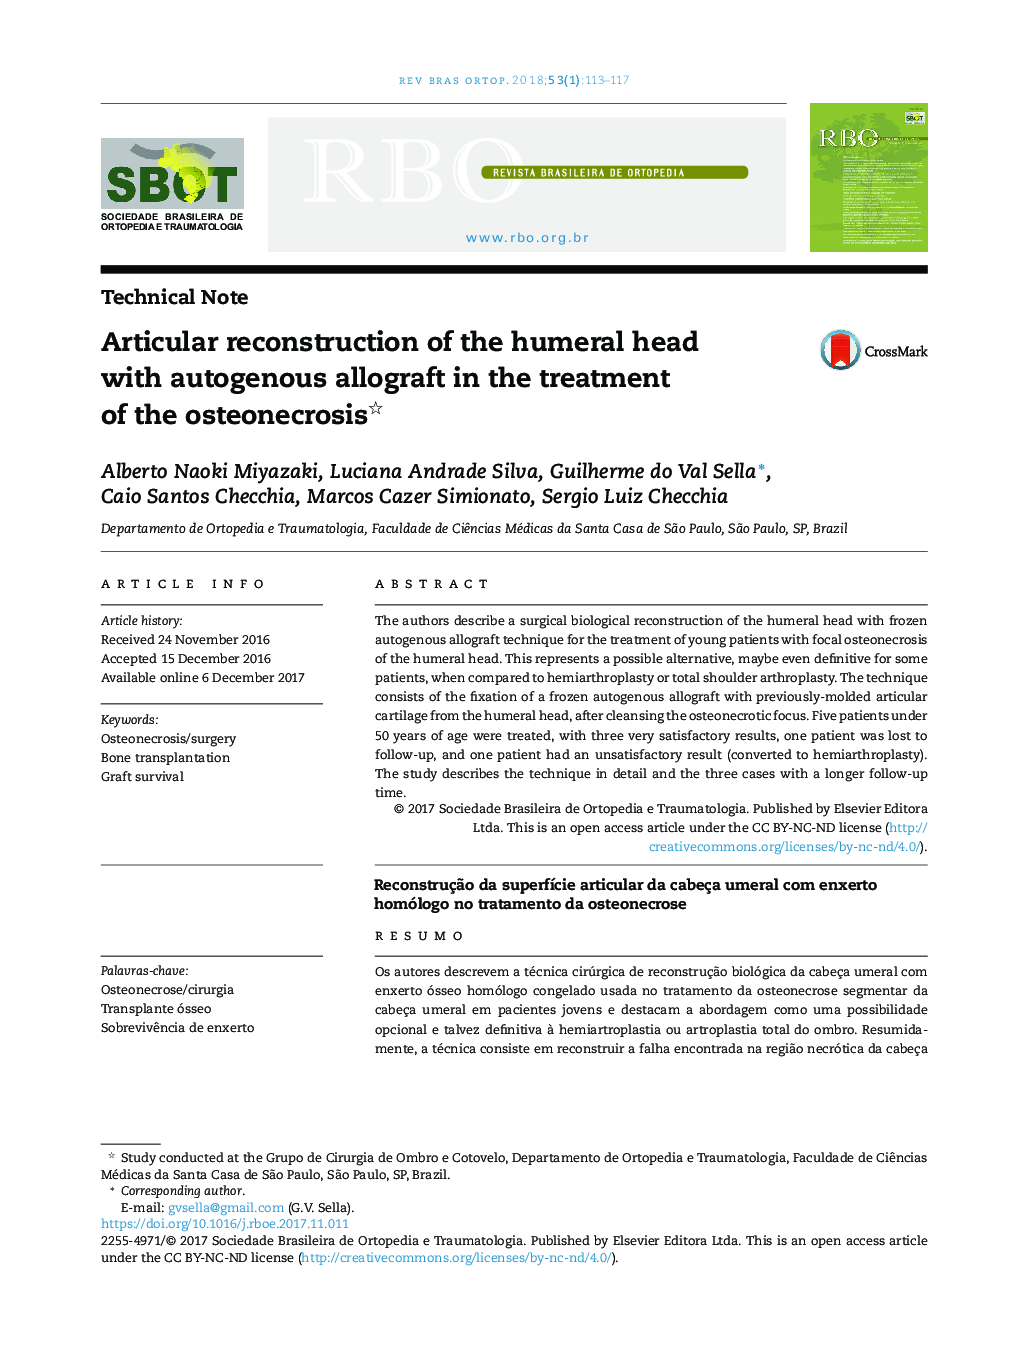 Articular reconstruction of the humeral head with autogenous allograft in the treatment of the osteonecrosis